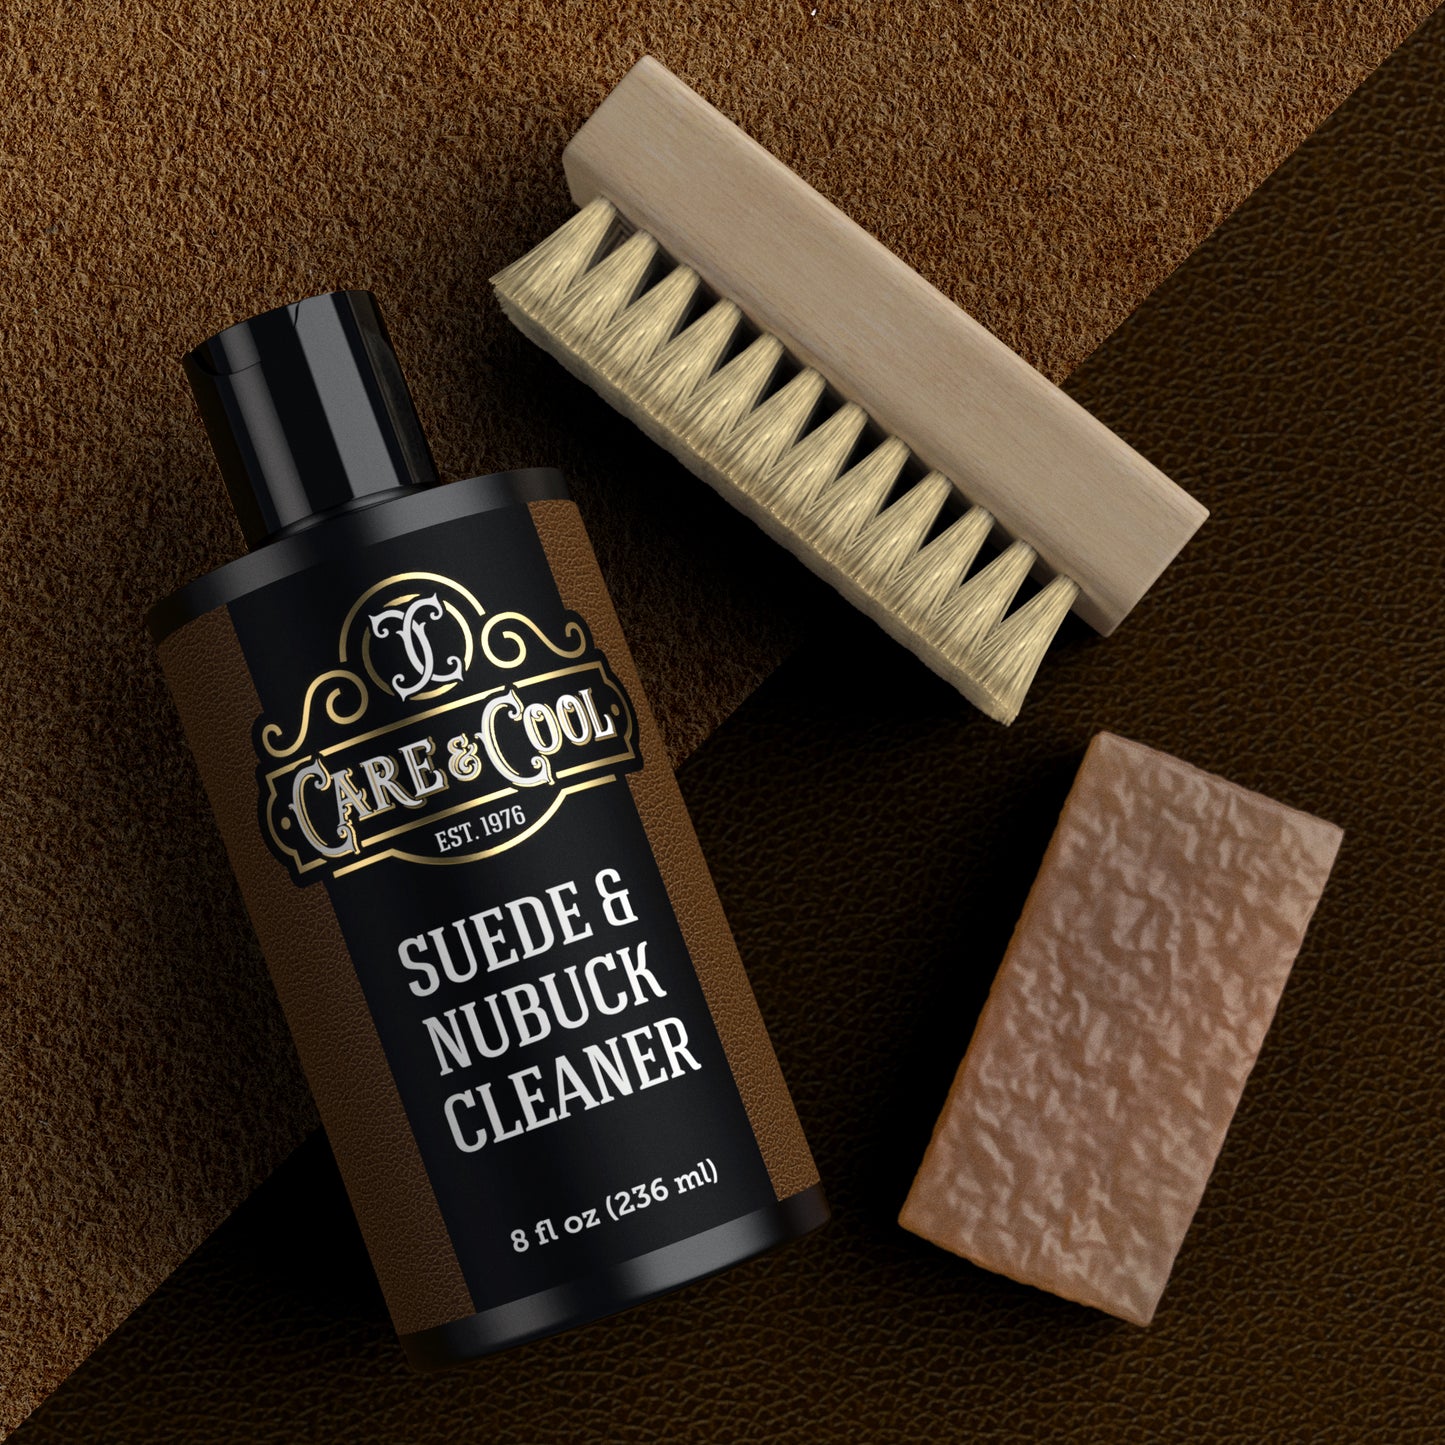 CARE & COOL SUEDE AND NUBUCK CLEANER KIT